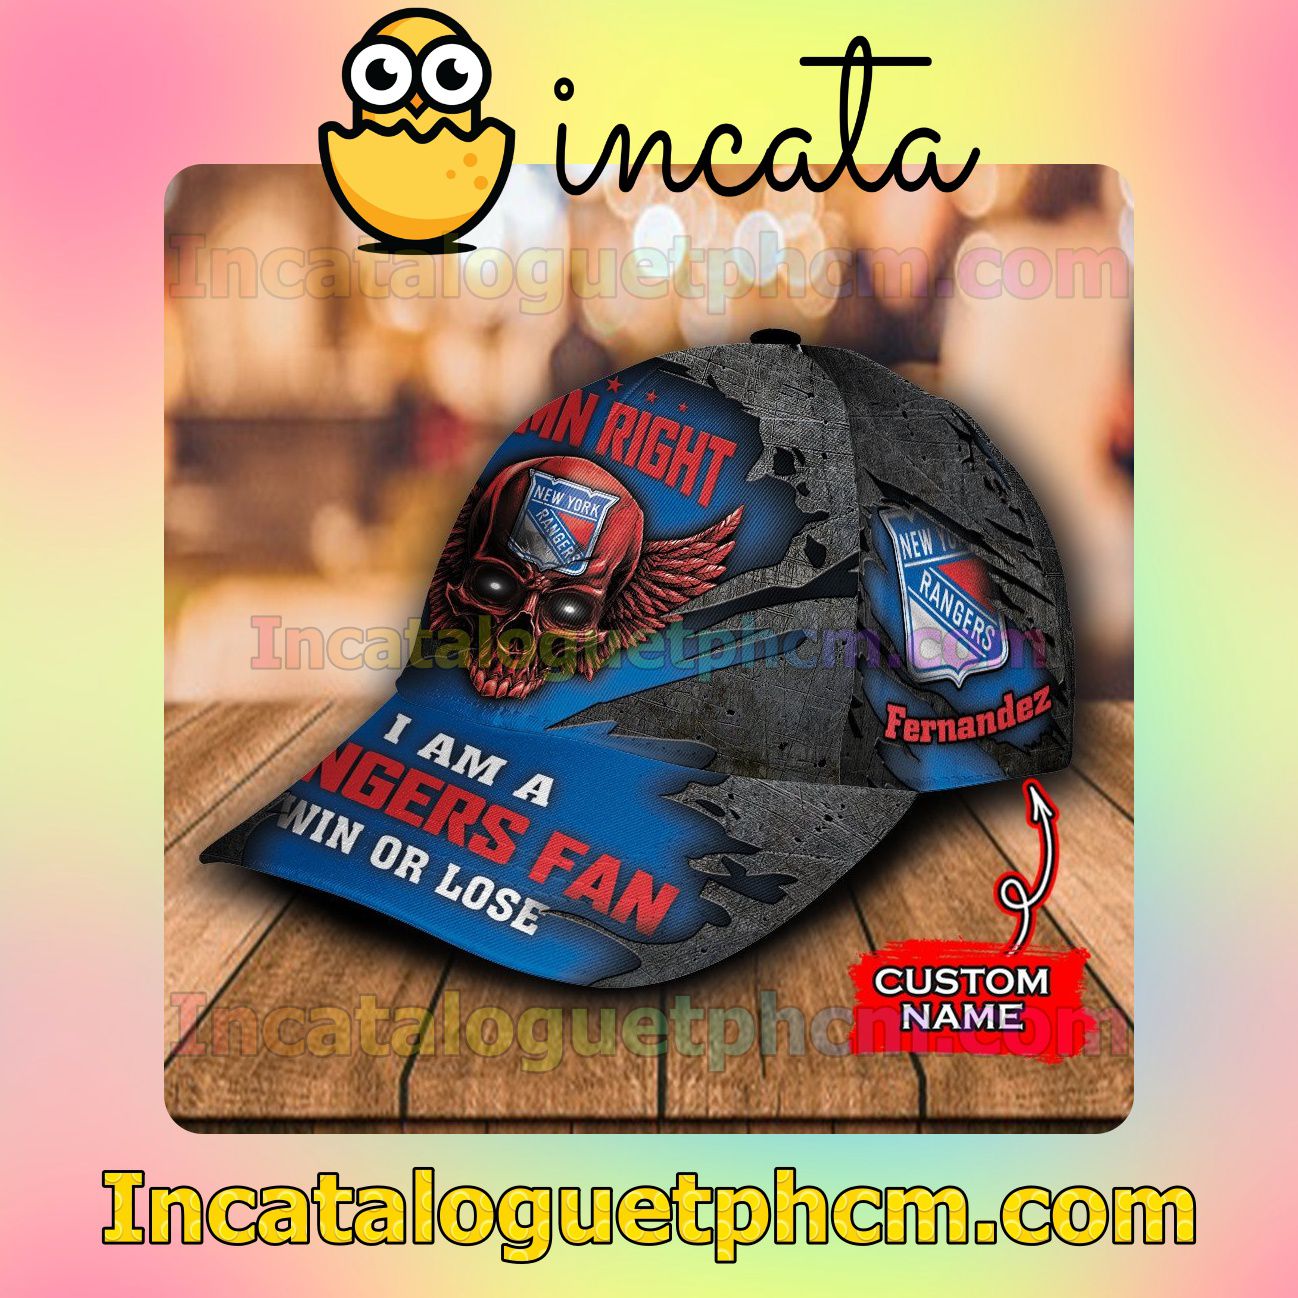 Print On Demand New York Rangers Skull Damn Right I Am A Fan Win Or Lose NHL Customized Hat Caps